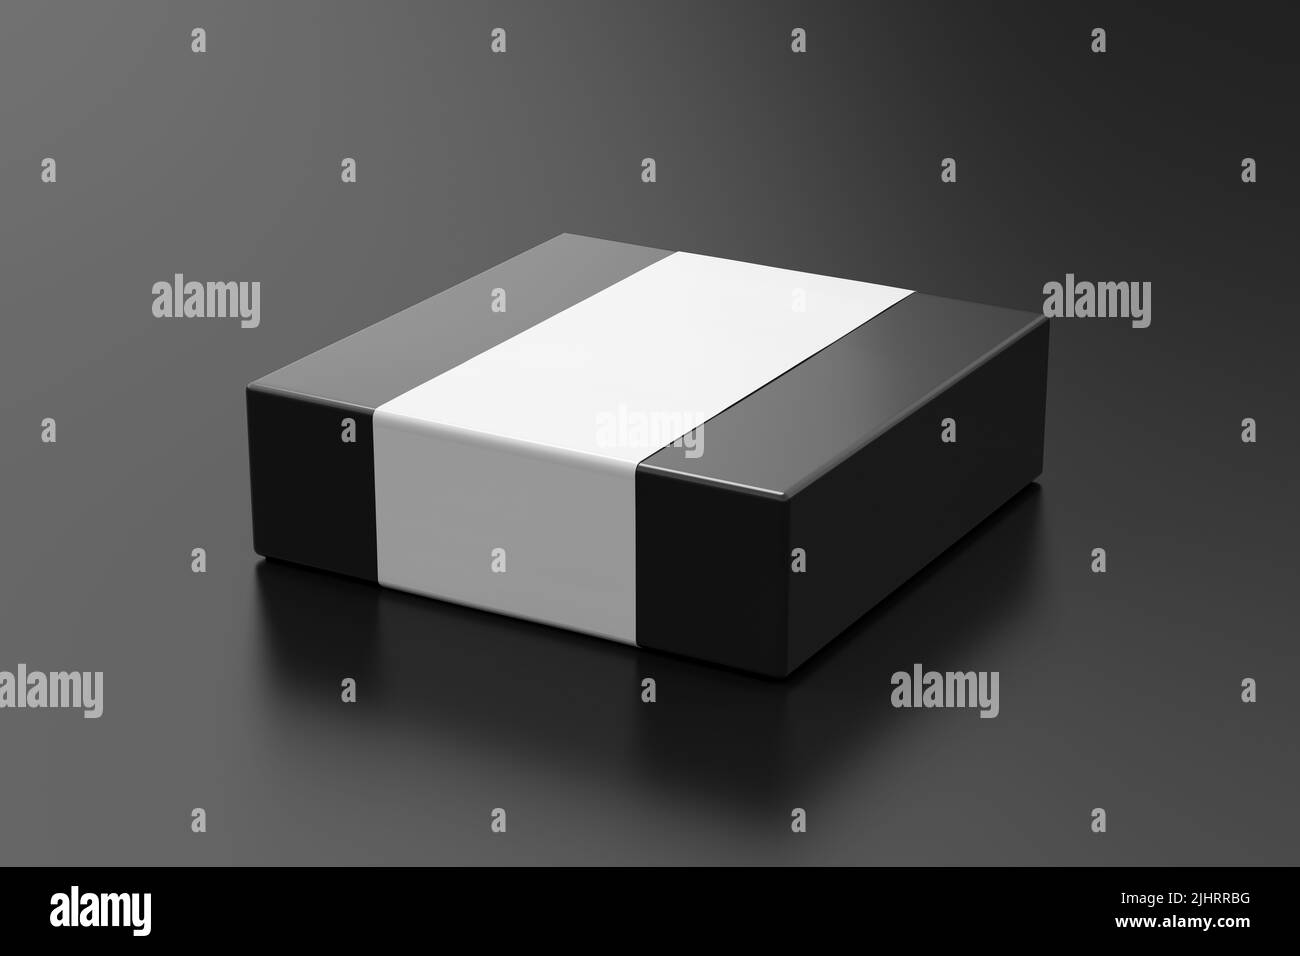 Square box mock up with blank paper cover label: Black gift box on black background. Side view. 3d illustration Stock Photo